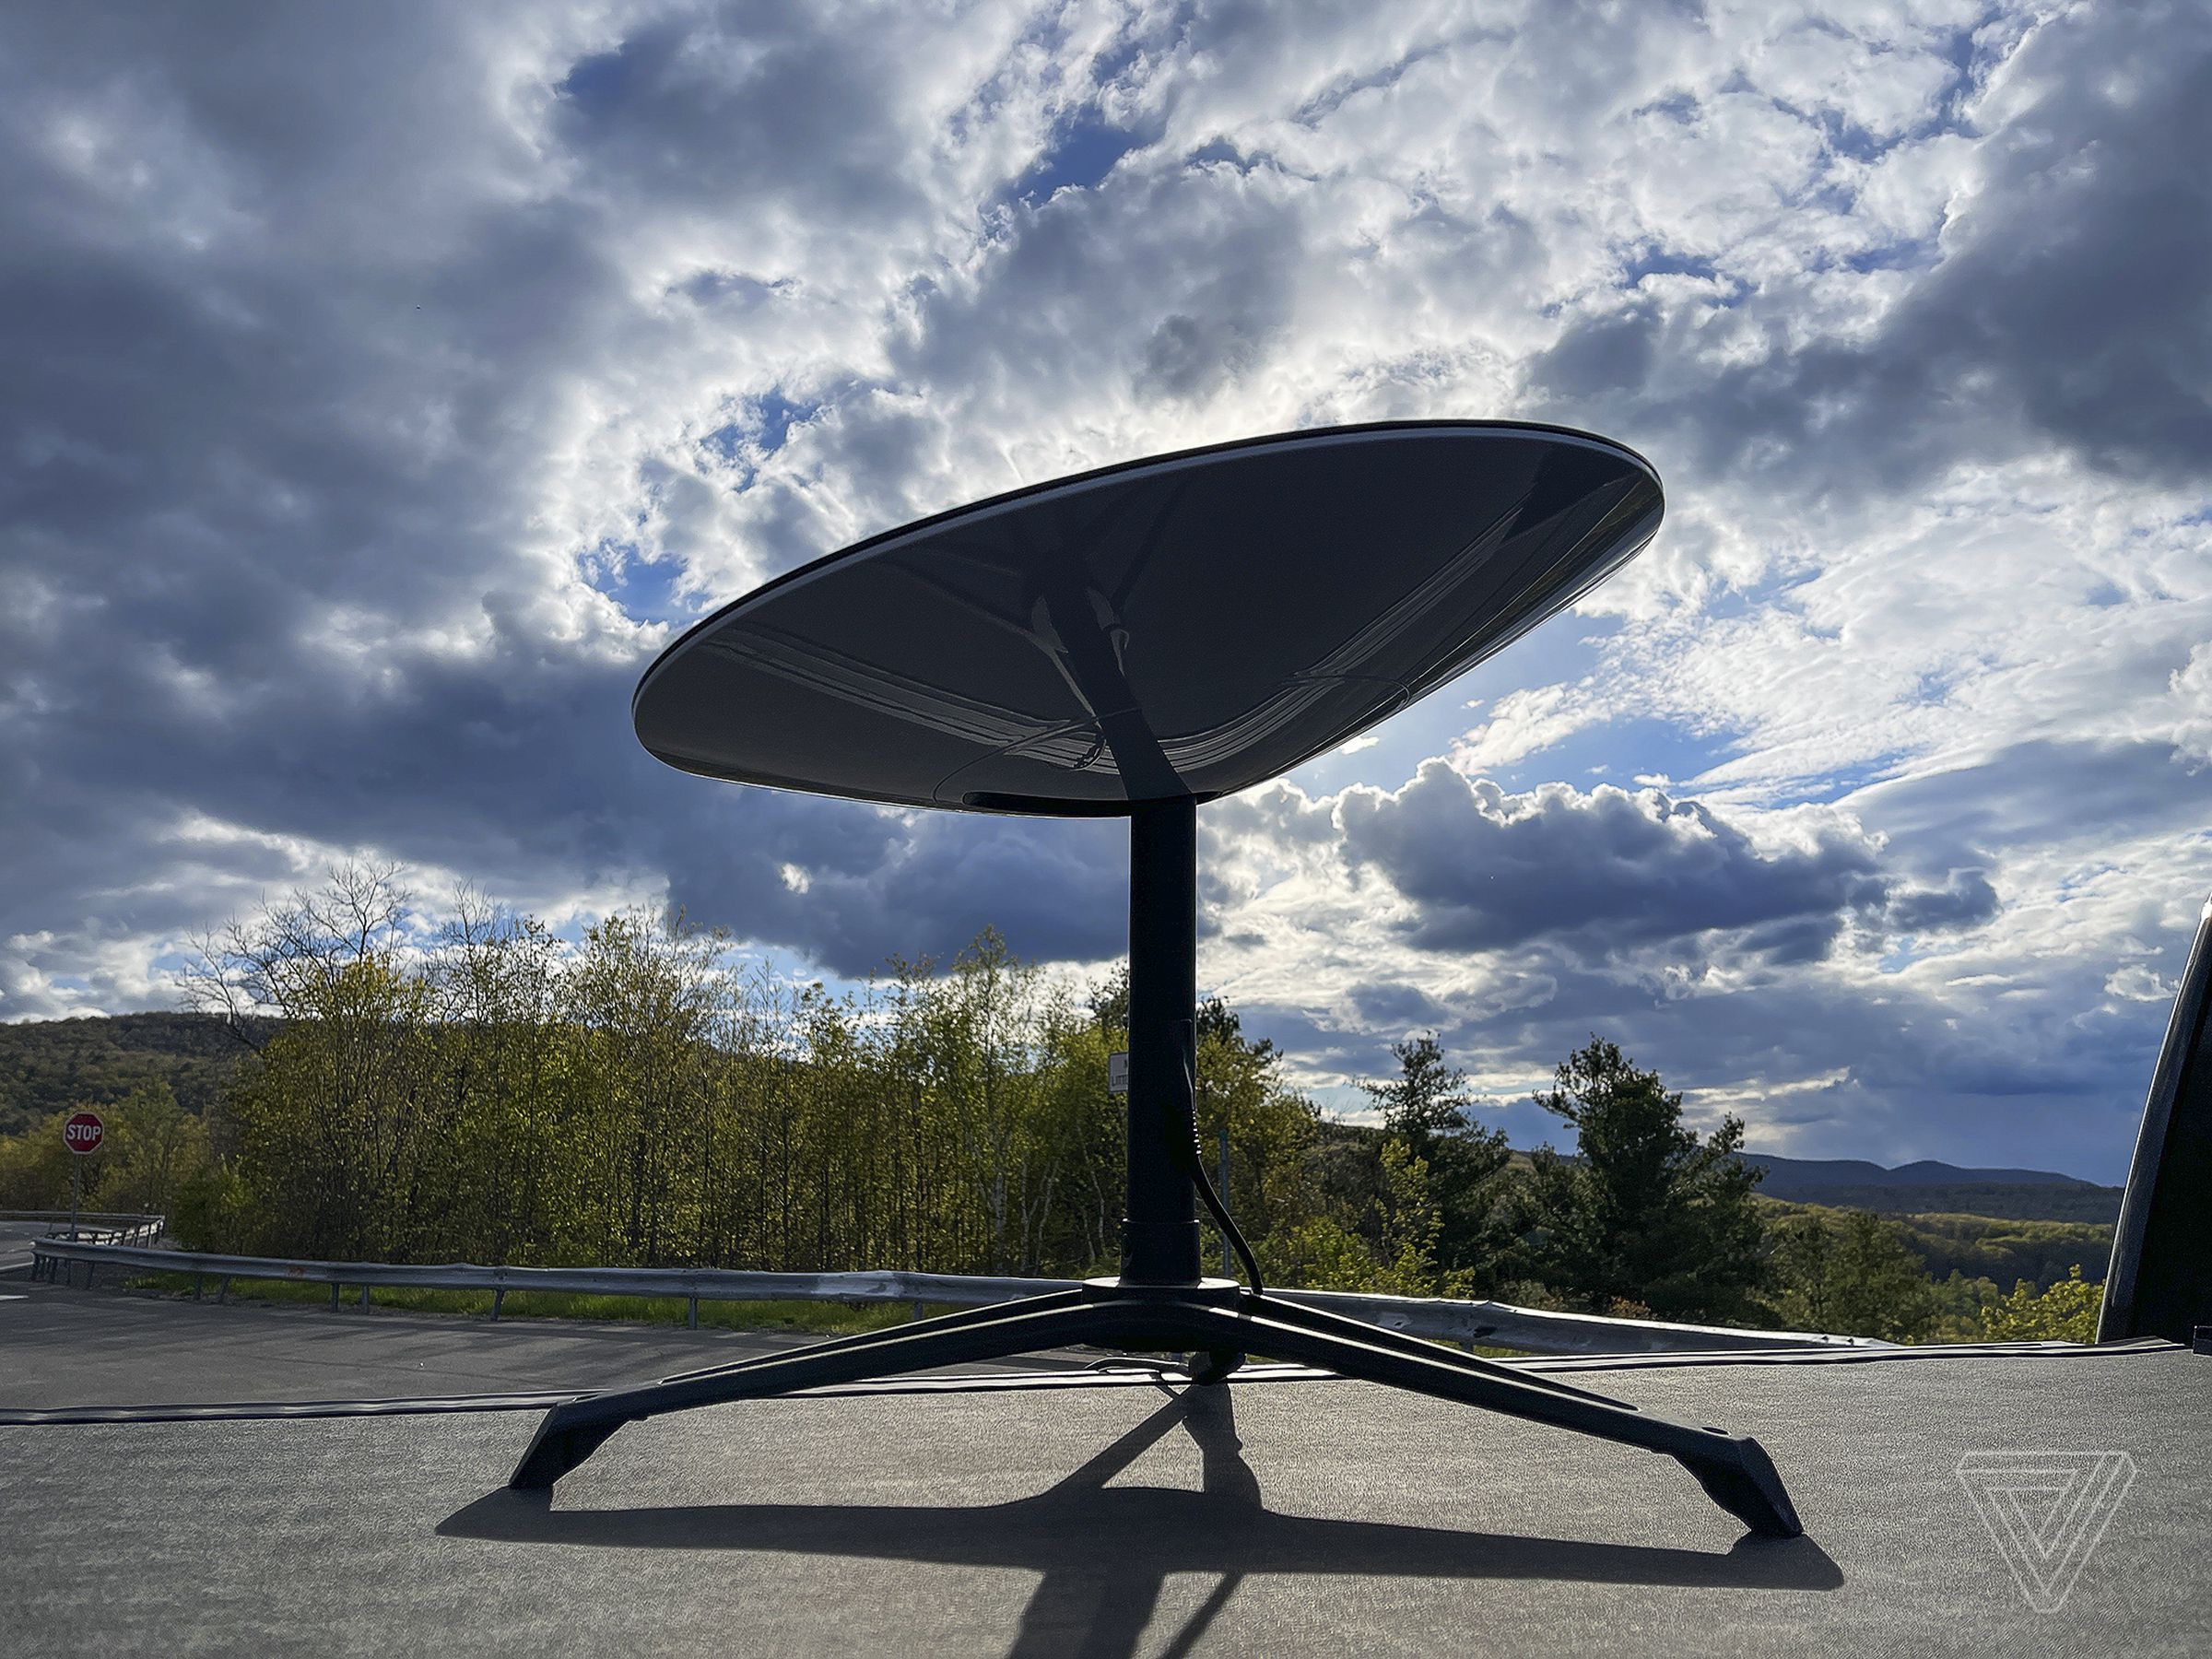 The dish needs a completely unobstructed view of the sky to work properly.